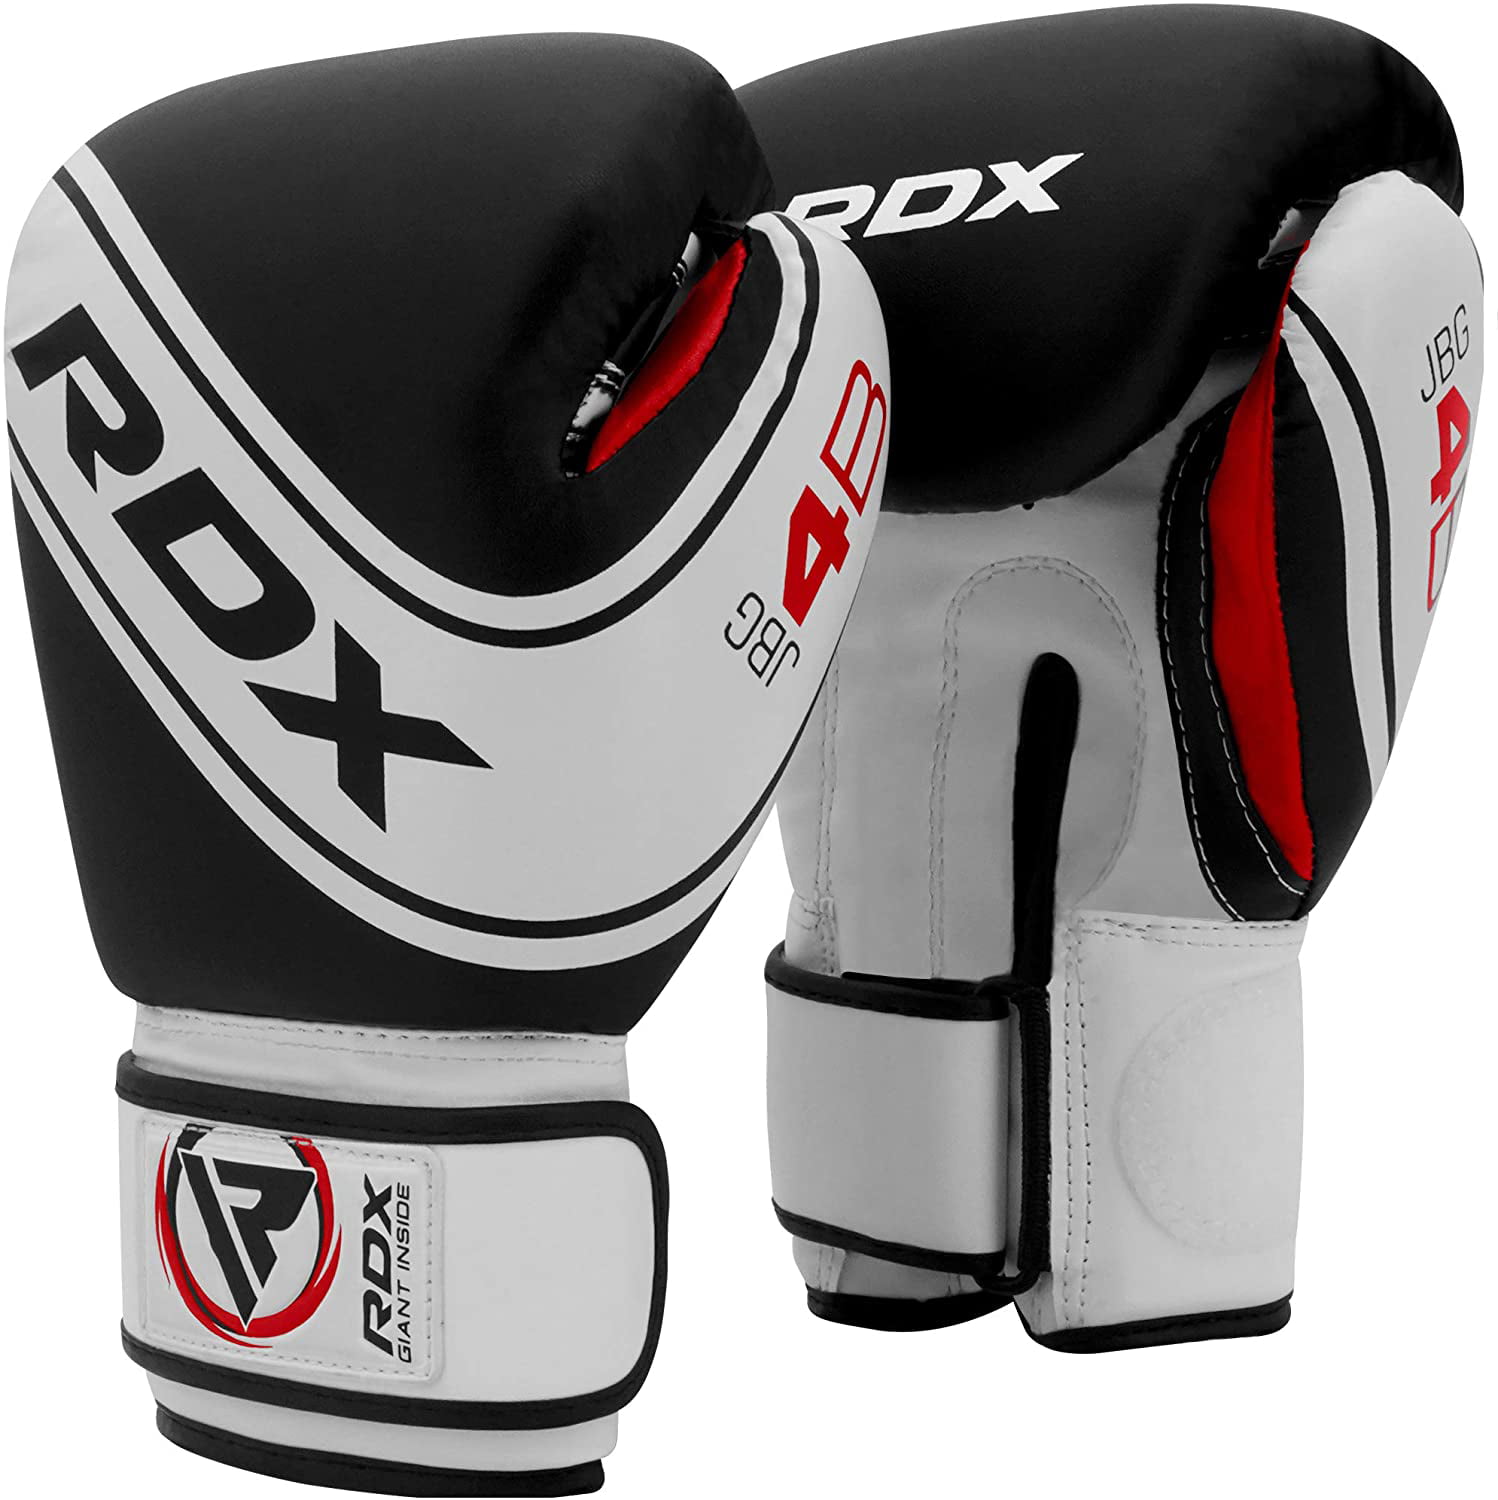 Focus Pads Hook Jab Mitts Boxing MMA Martial Arts UFC Fight Training 